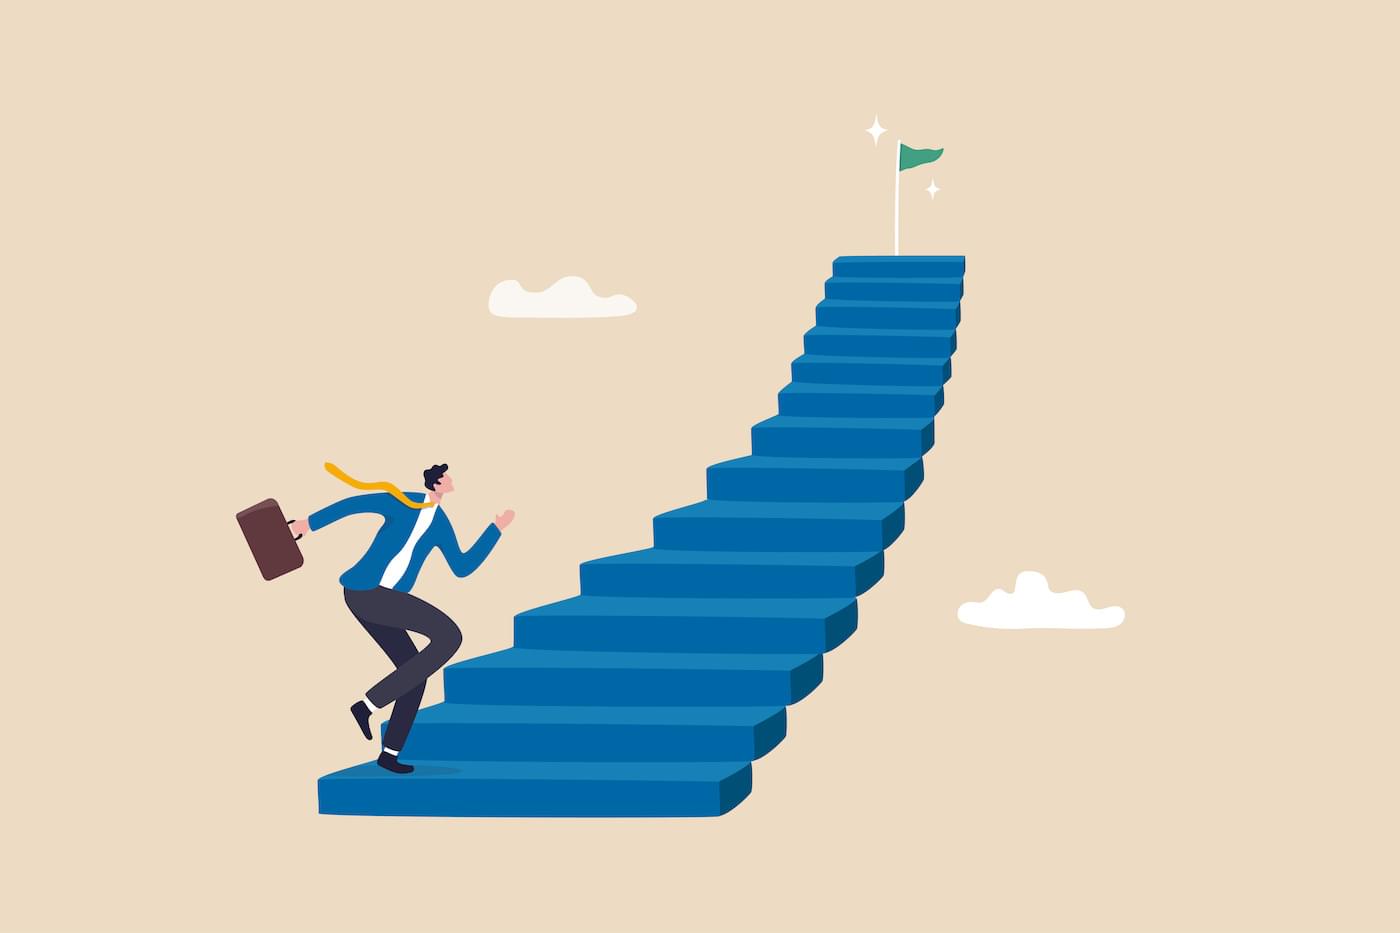 Illustration of business person climbing a set of stairs to reach a green flag. Represents a performance improvement plan.